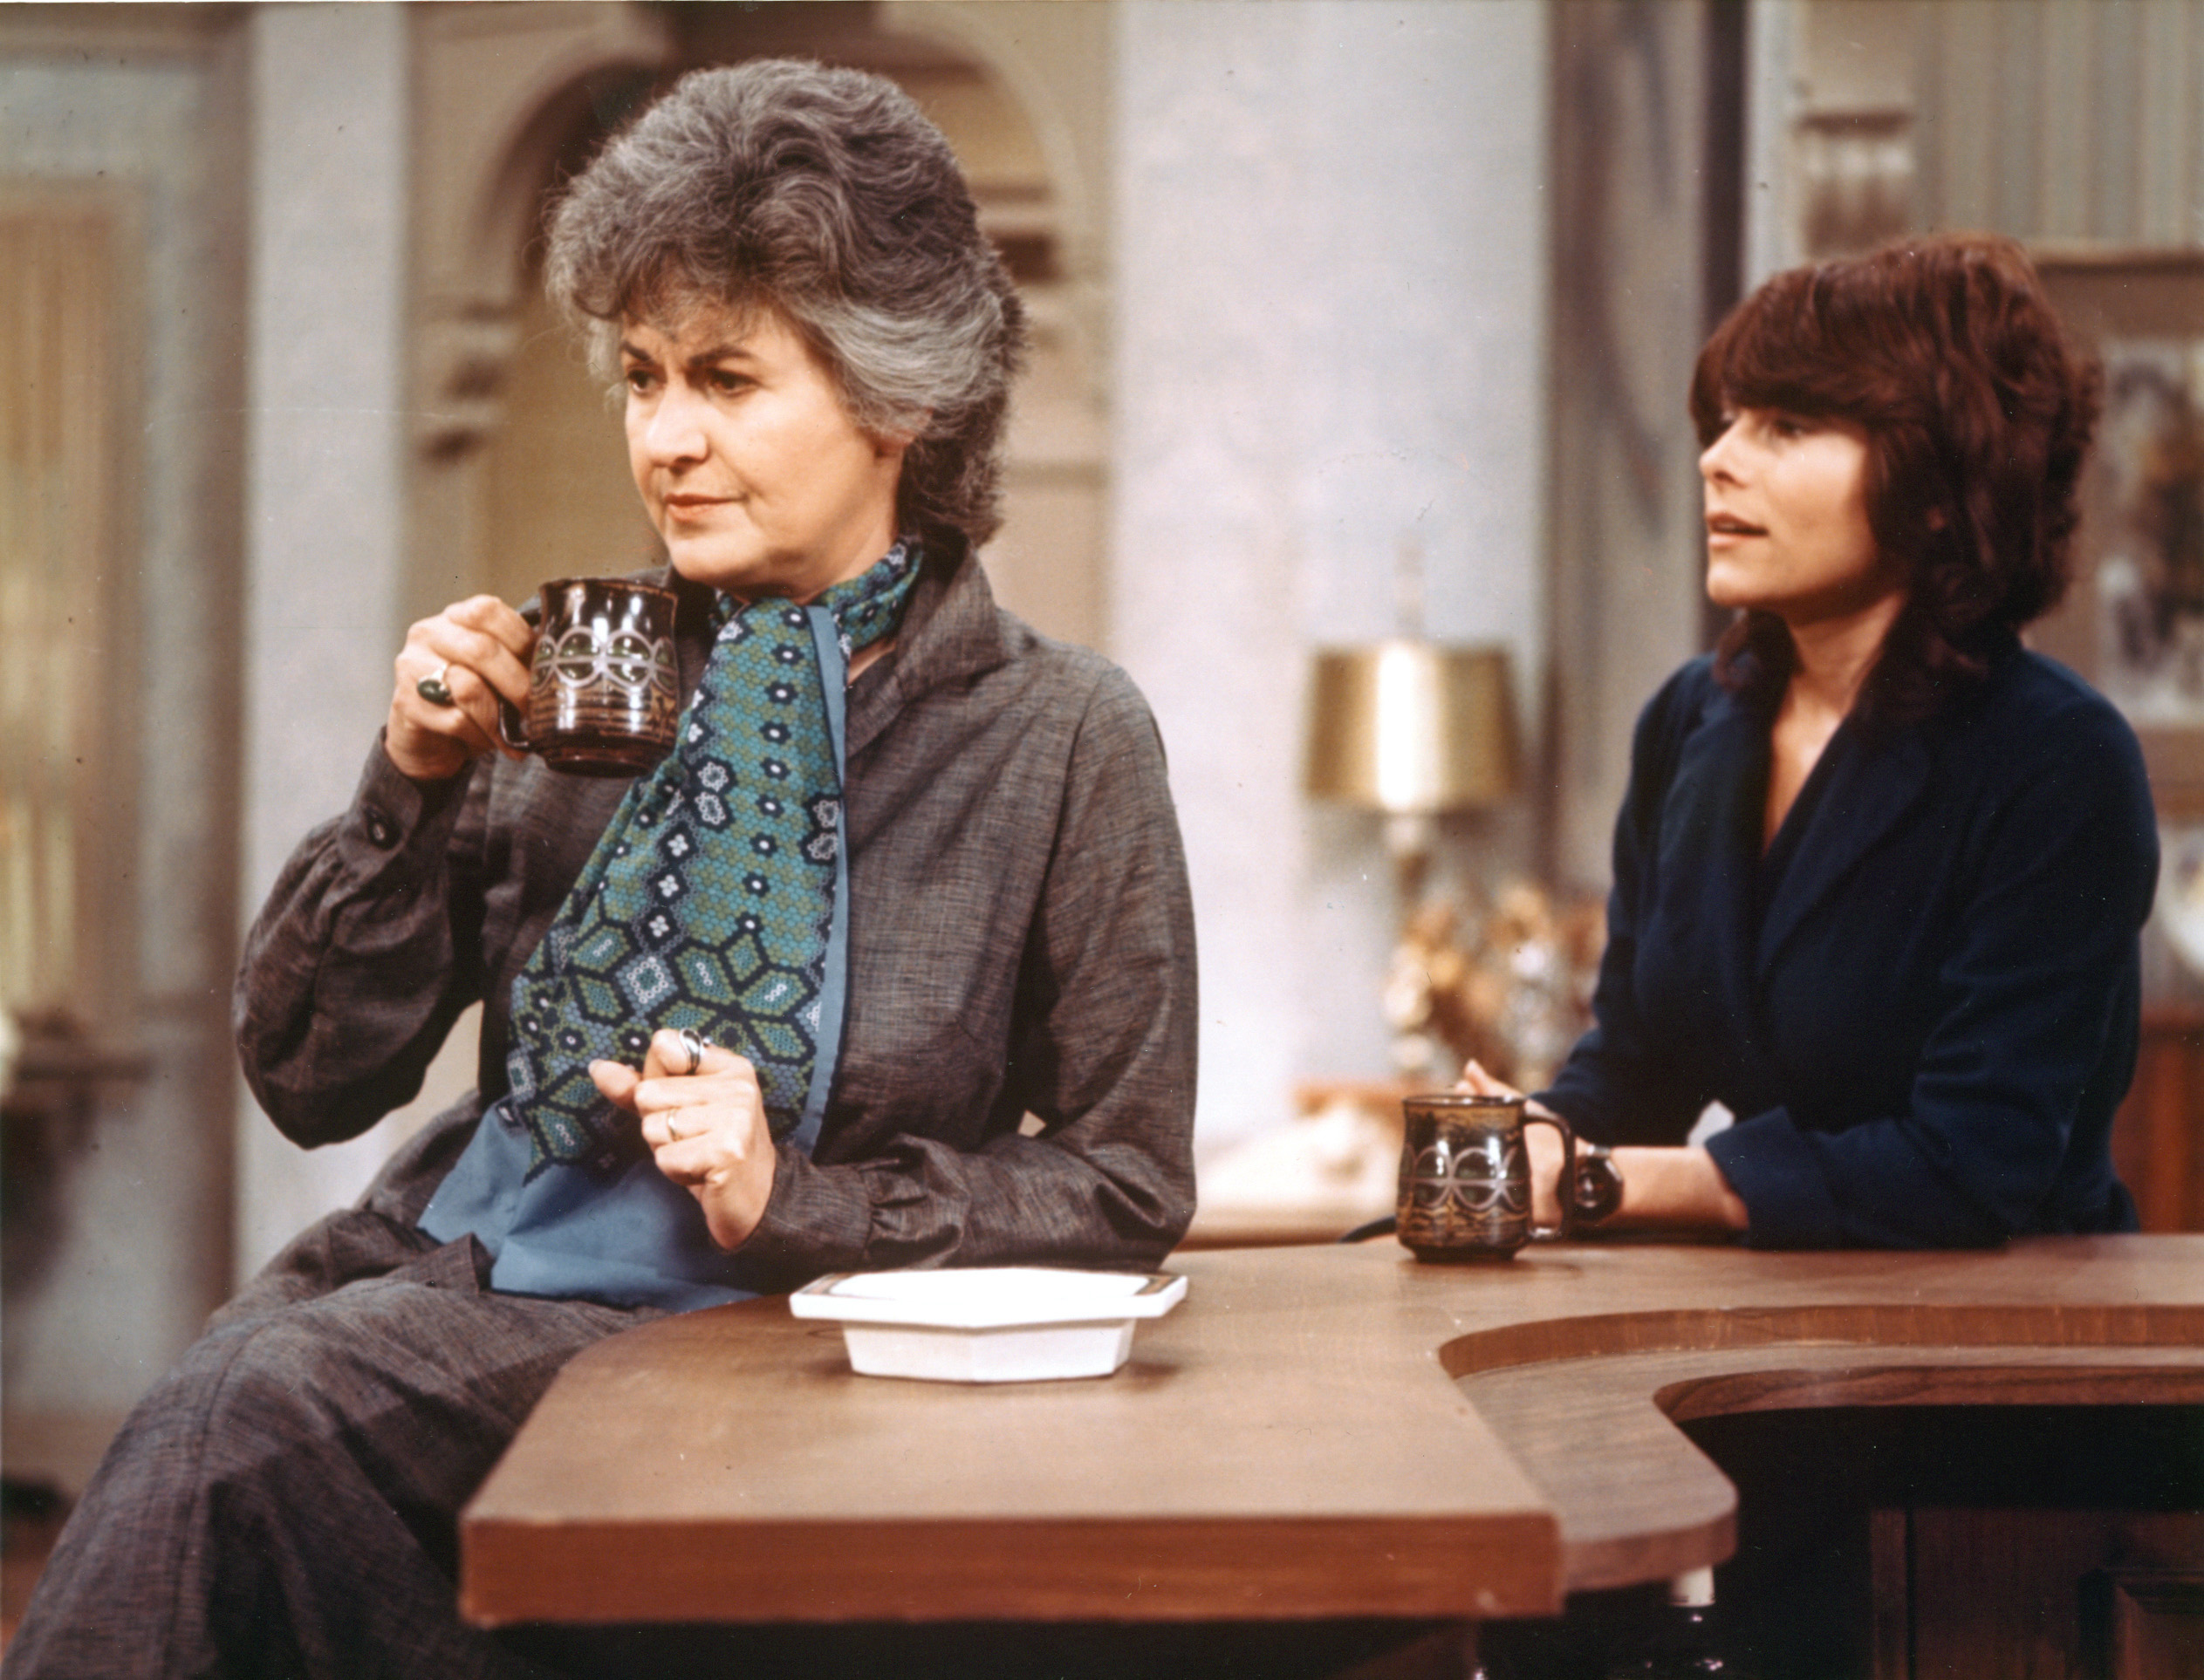 'Maude' stars Bea Arthur and Adrienne Barbeau in a scene from the CBS hit comedy